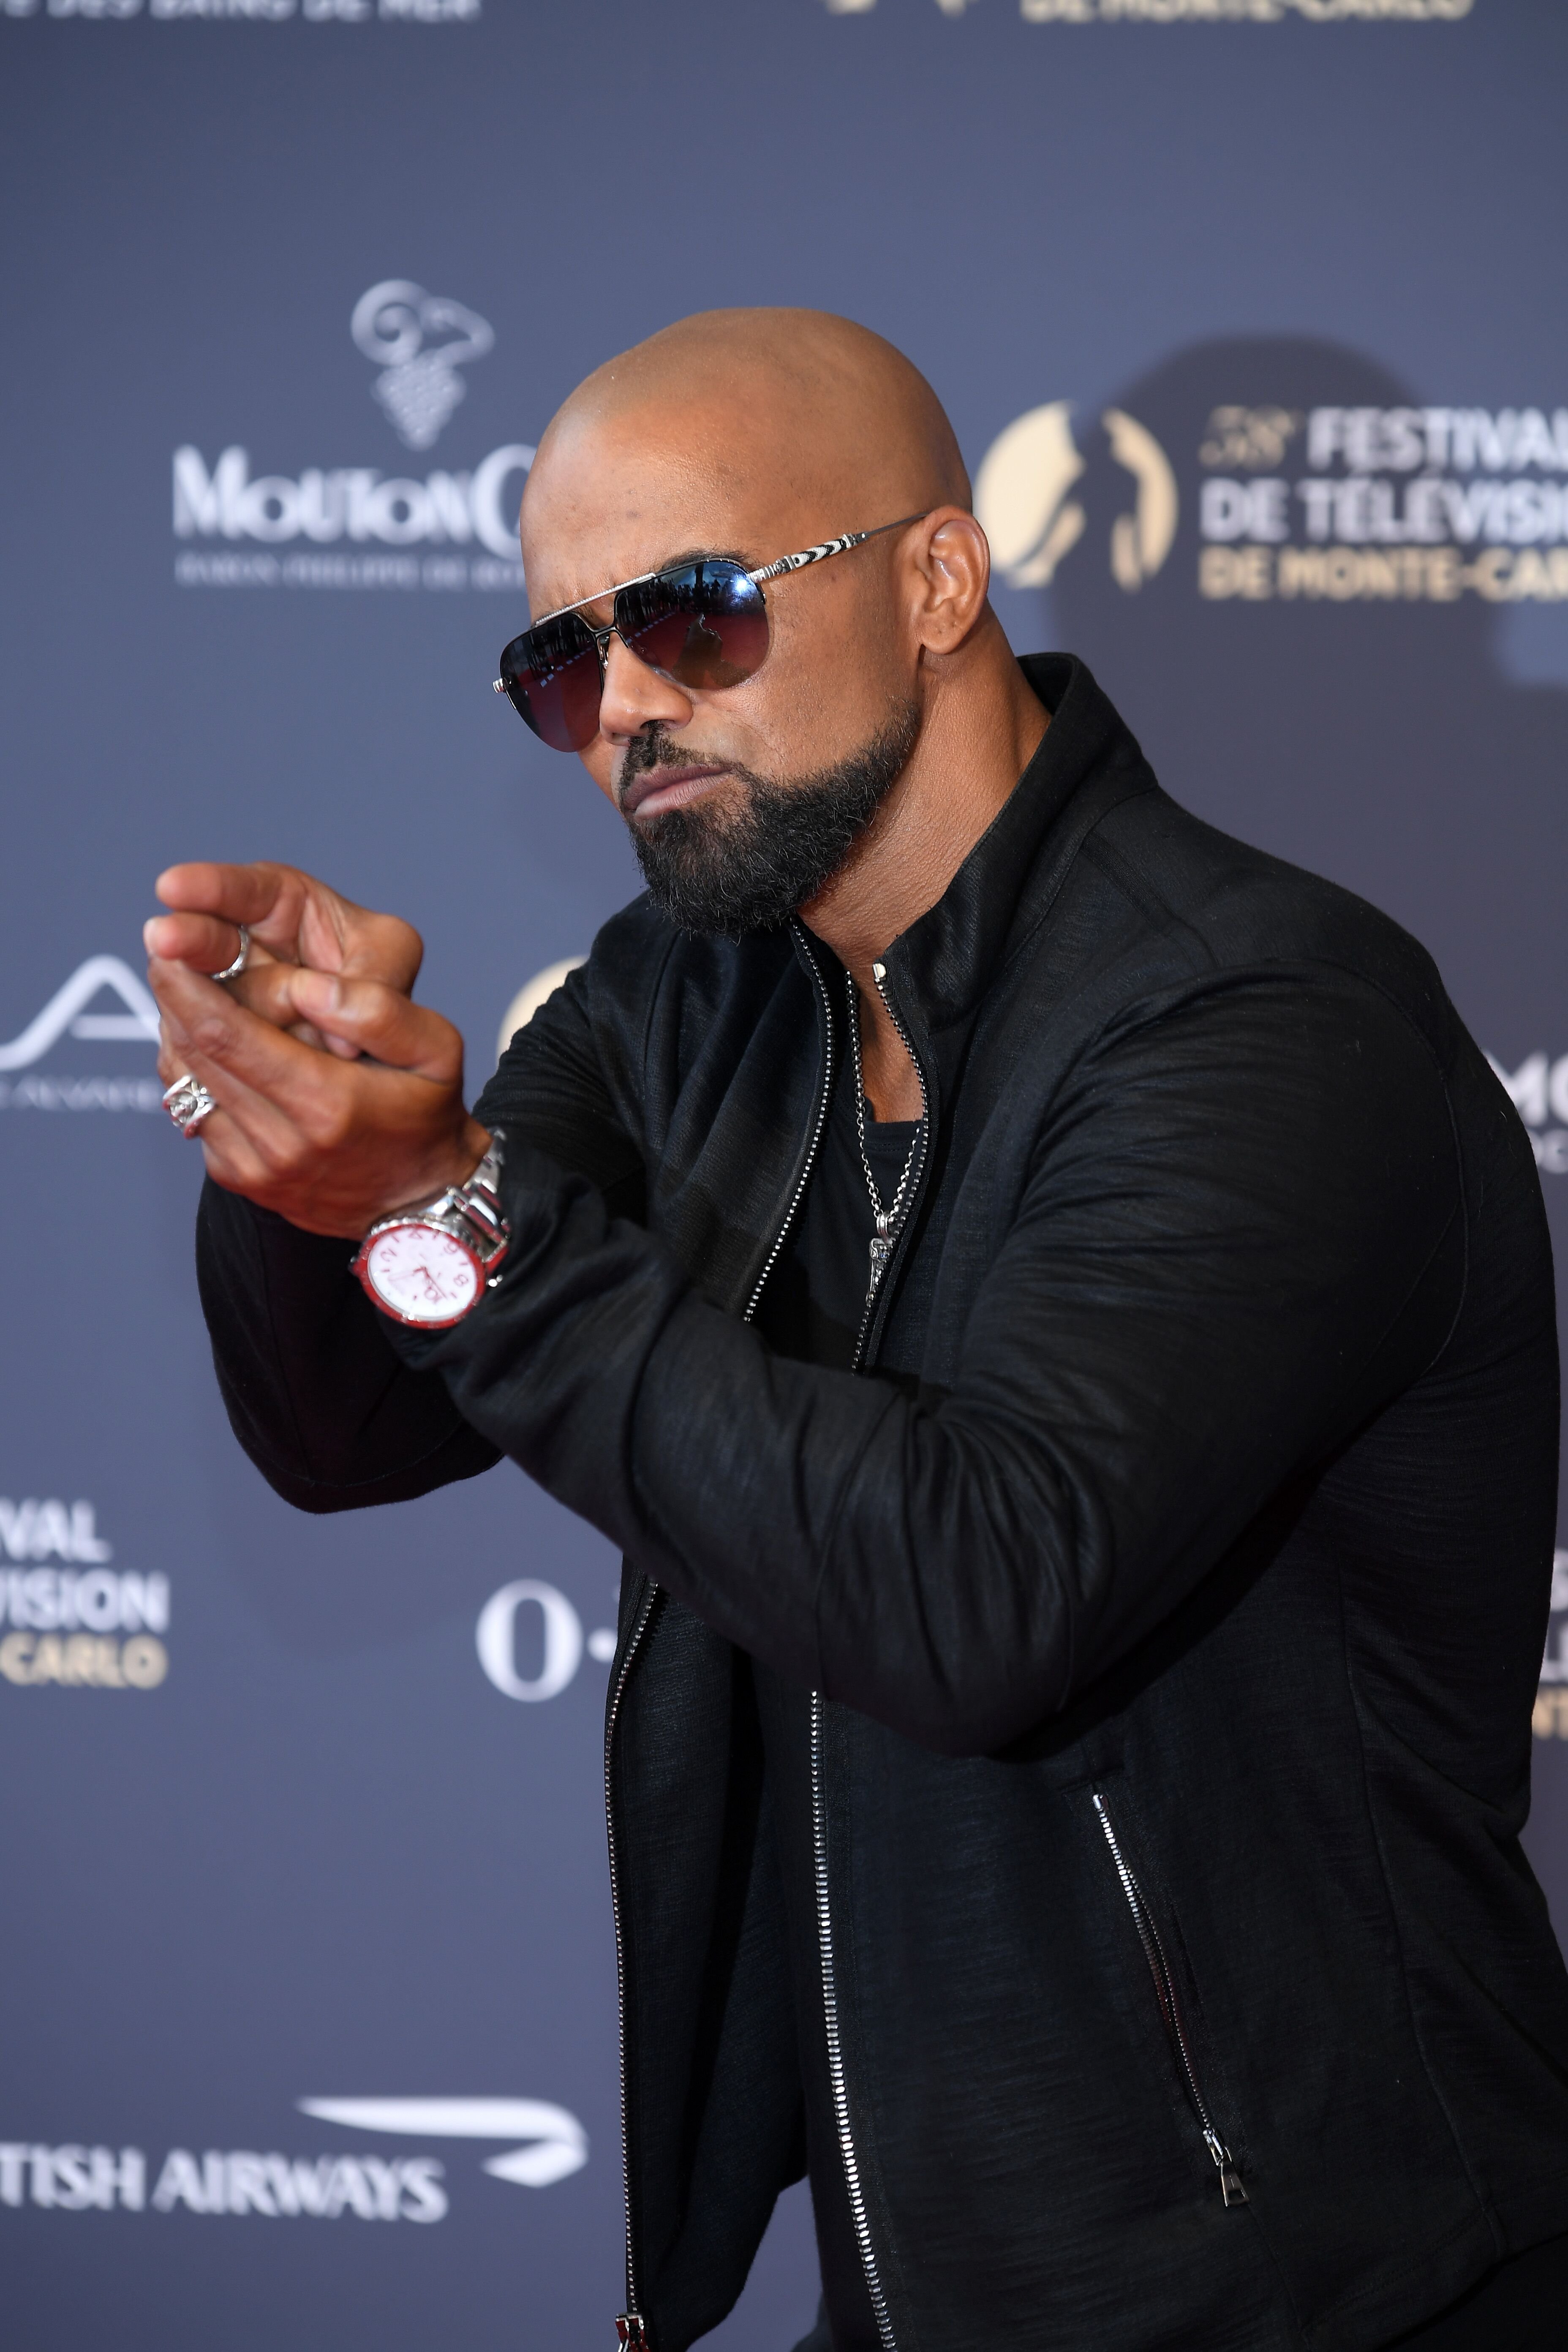 Shemar Moore attends the opening ceremony of the 58th Monte Carlo TV Festival. | Source: Getty Images